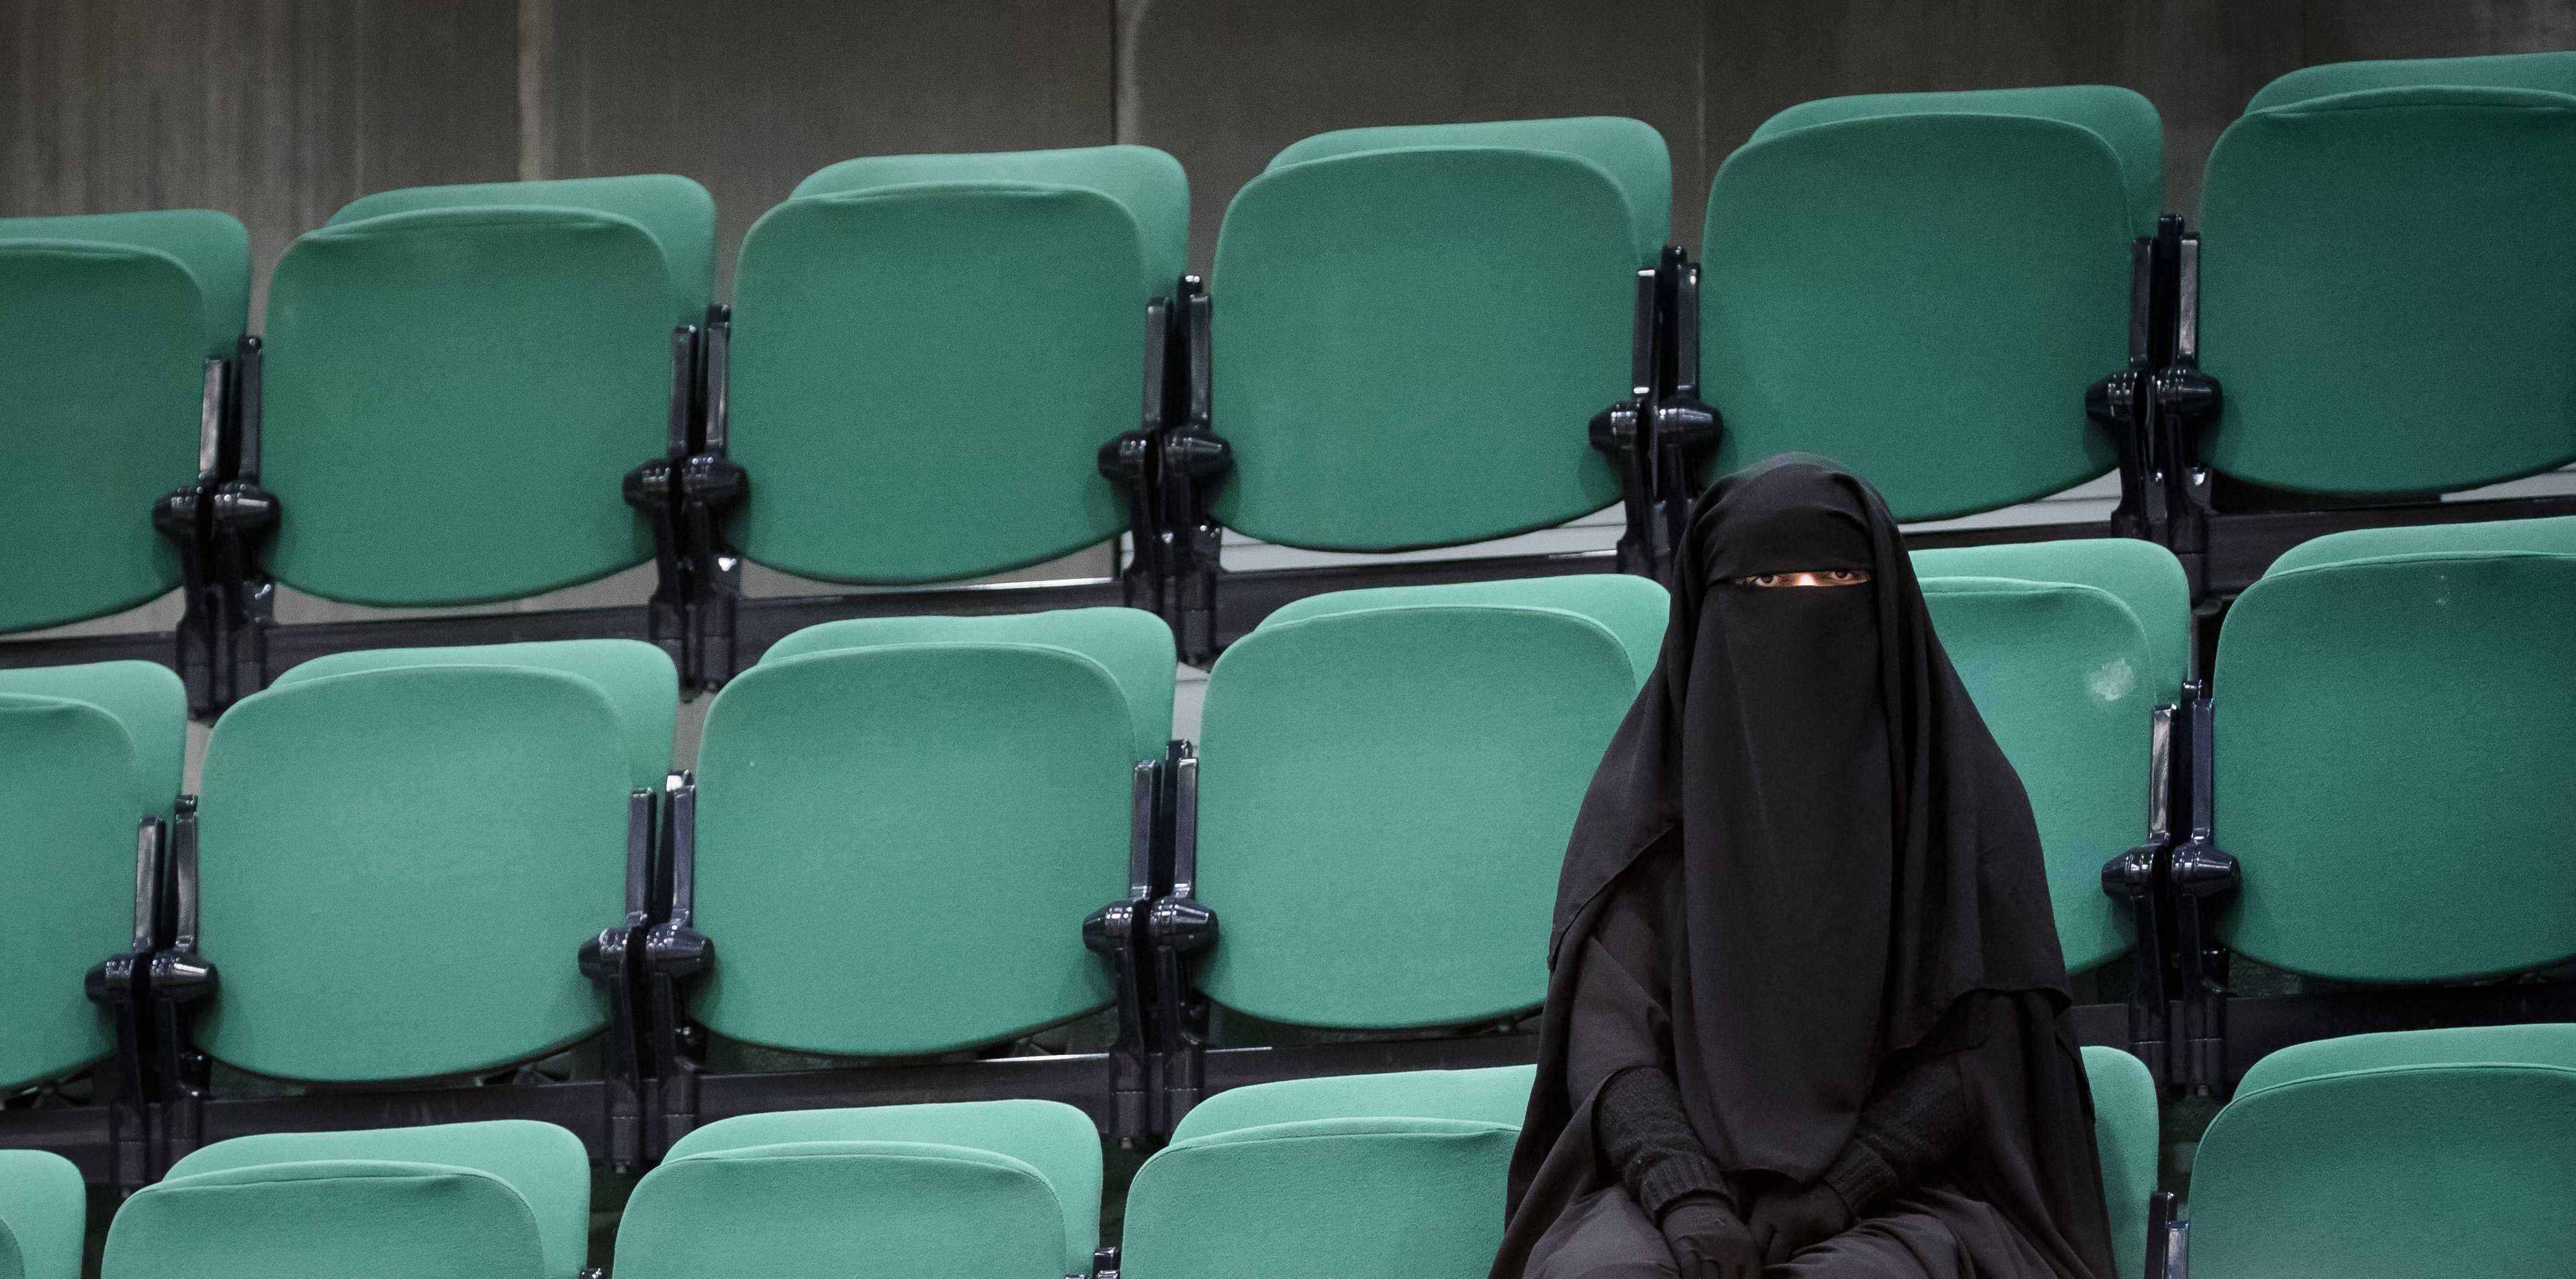 A Burqa-clad woman sits at the public gallery of visitor's section, before the debate on face covering clothing.